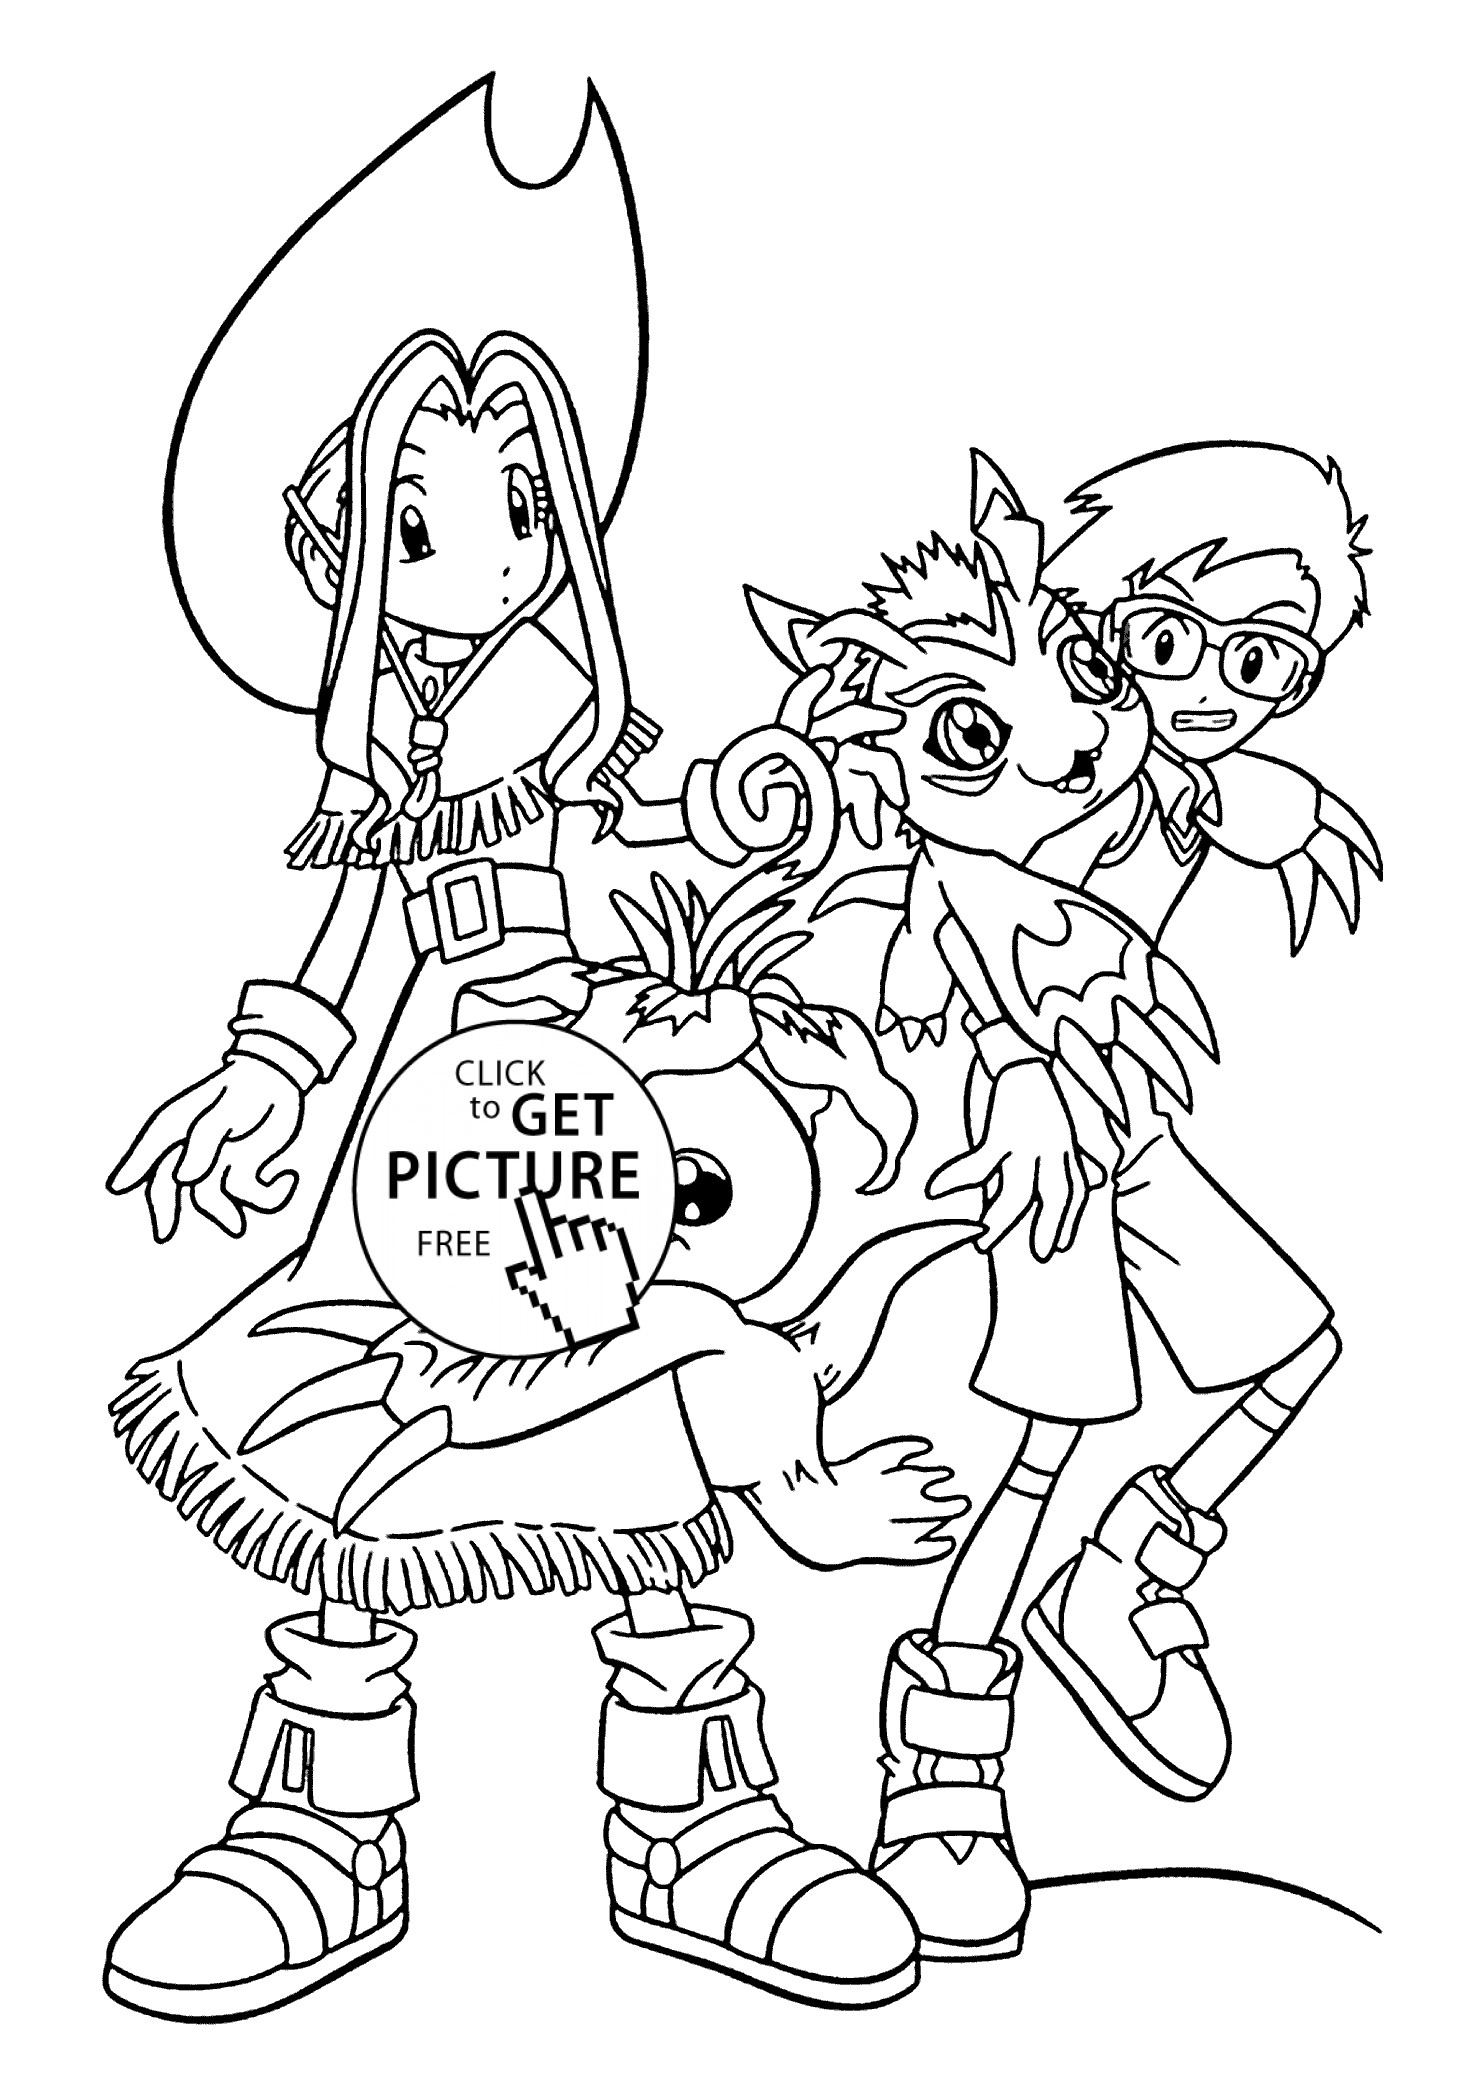 Manga Coloring Pages For Kids
 Mimi and Joe from Digimon anime coloring pages for kids